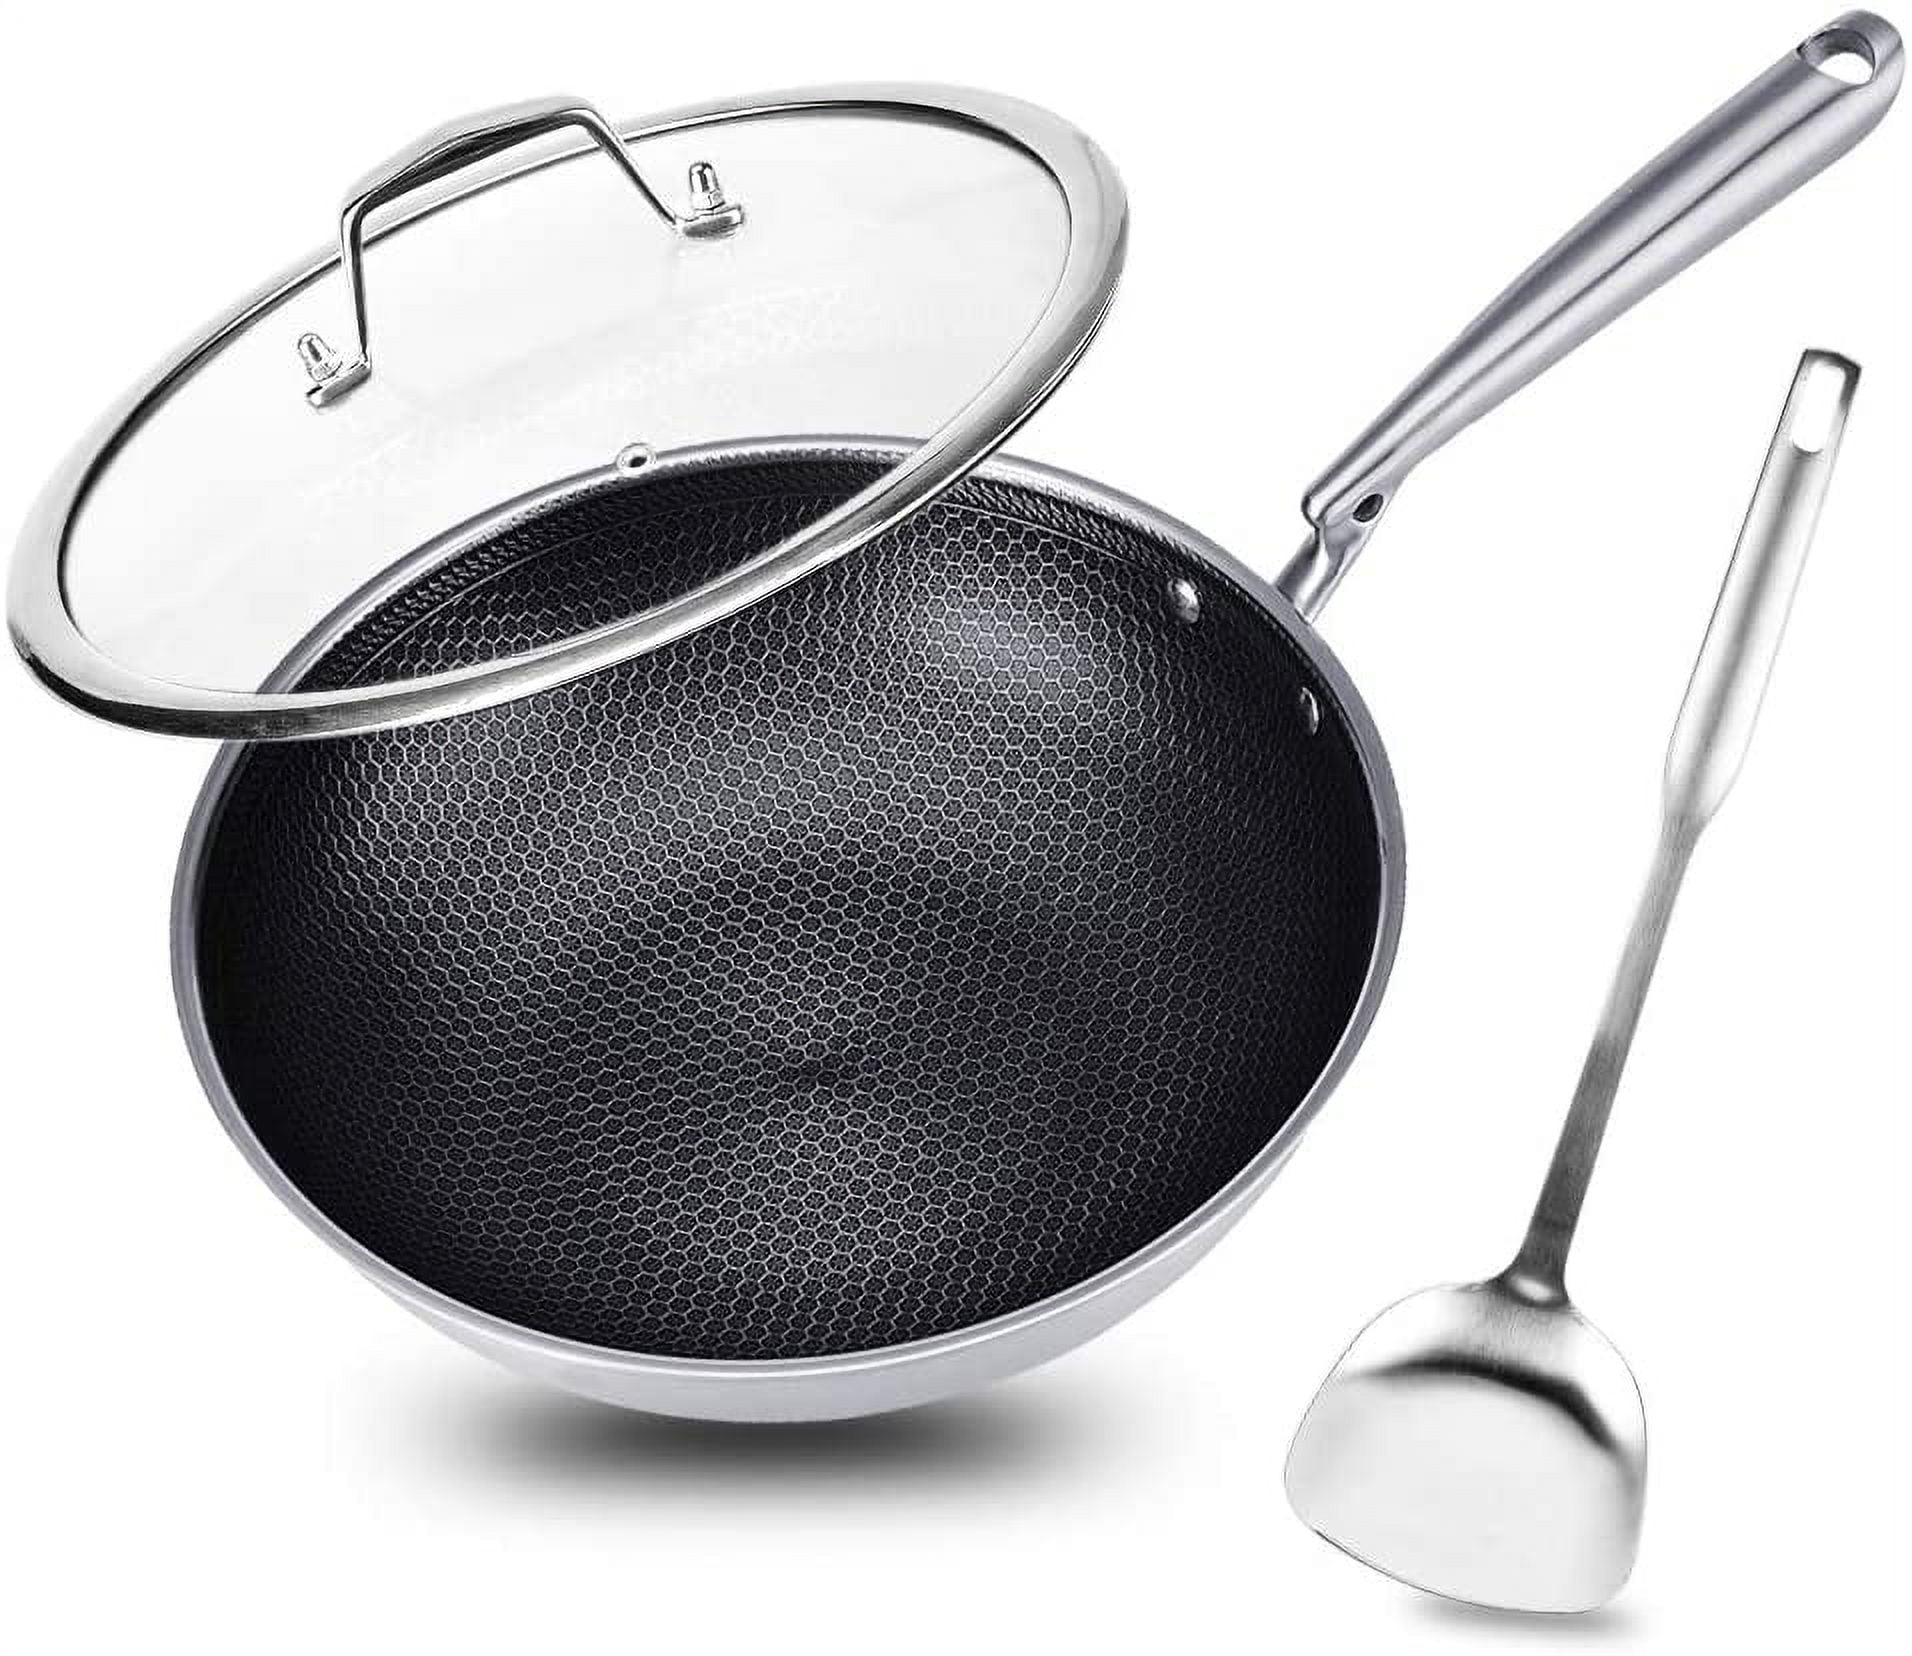 Potinv Hybrid Stainless Steel Wok with Stay Cool Handles 12 Inch,Non-Stick,  Dishwasher and Oven Safe, Works with Induction, Ceramic, Electric, and Gas